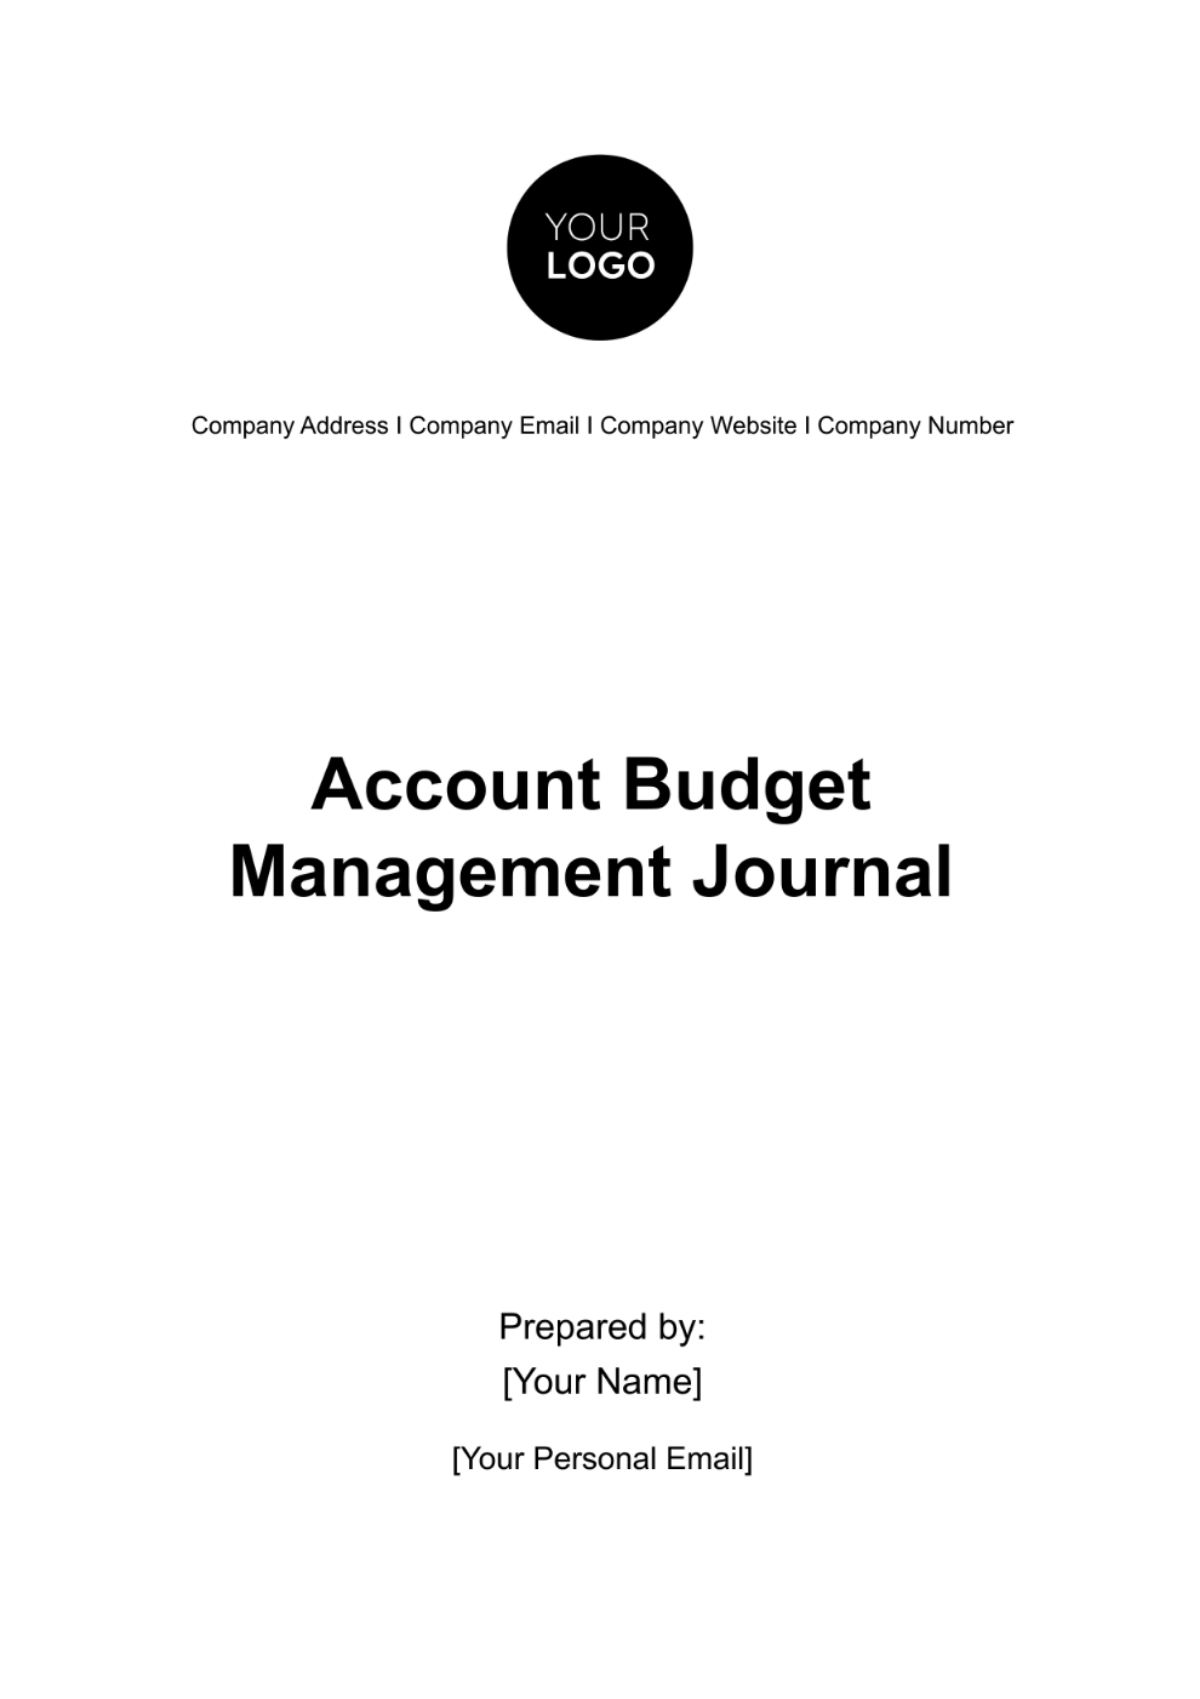 Free Account Budget Management Journal Template